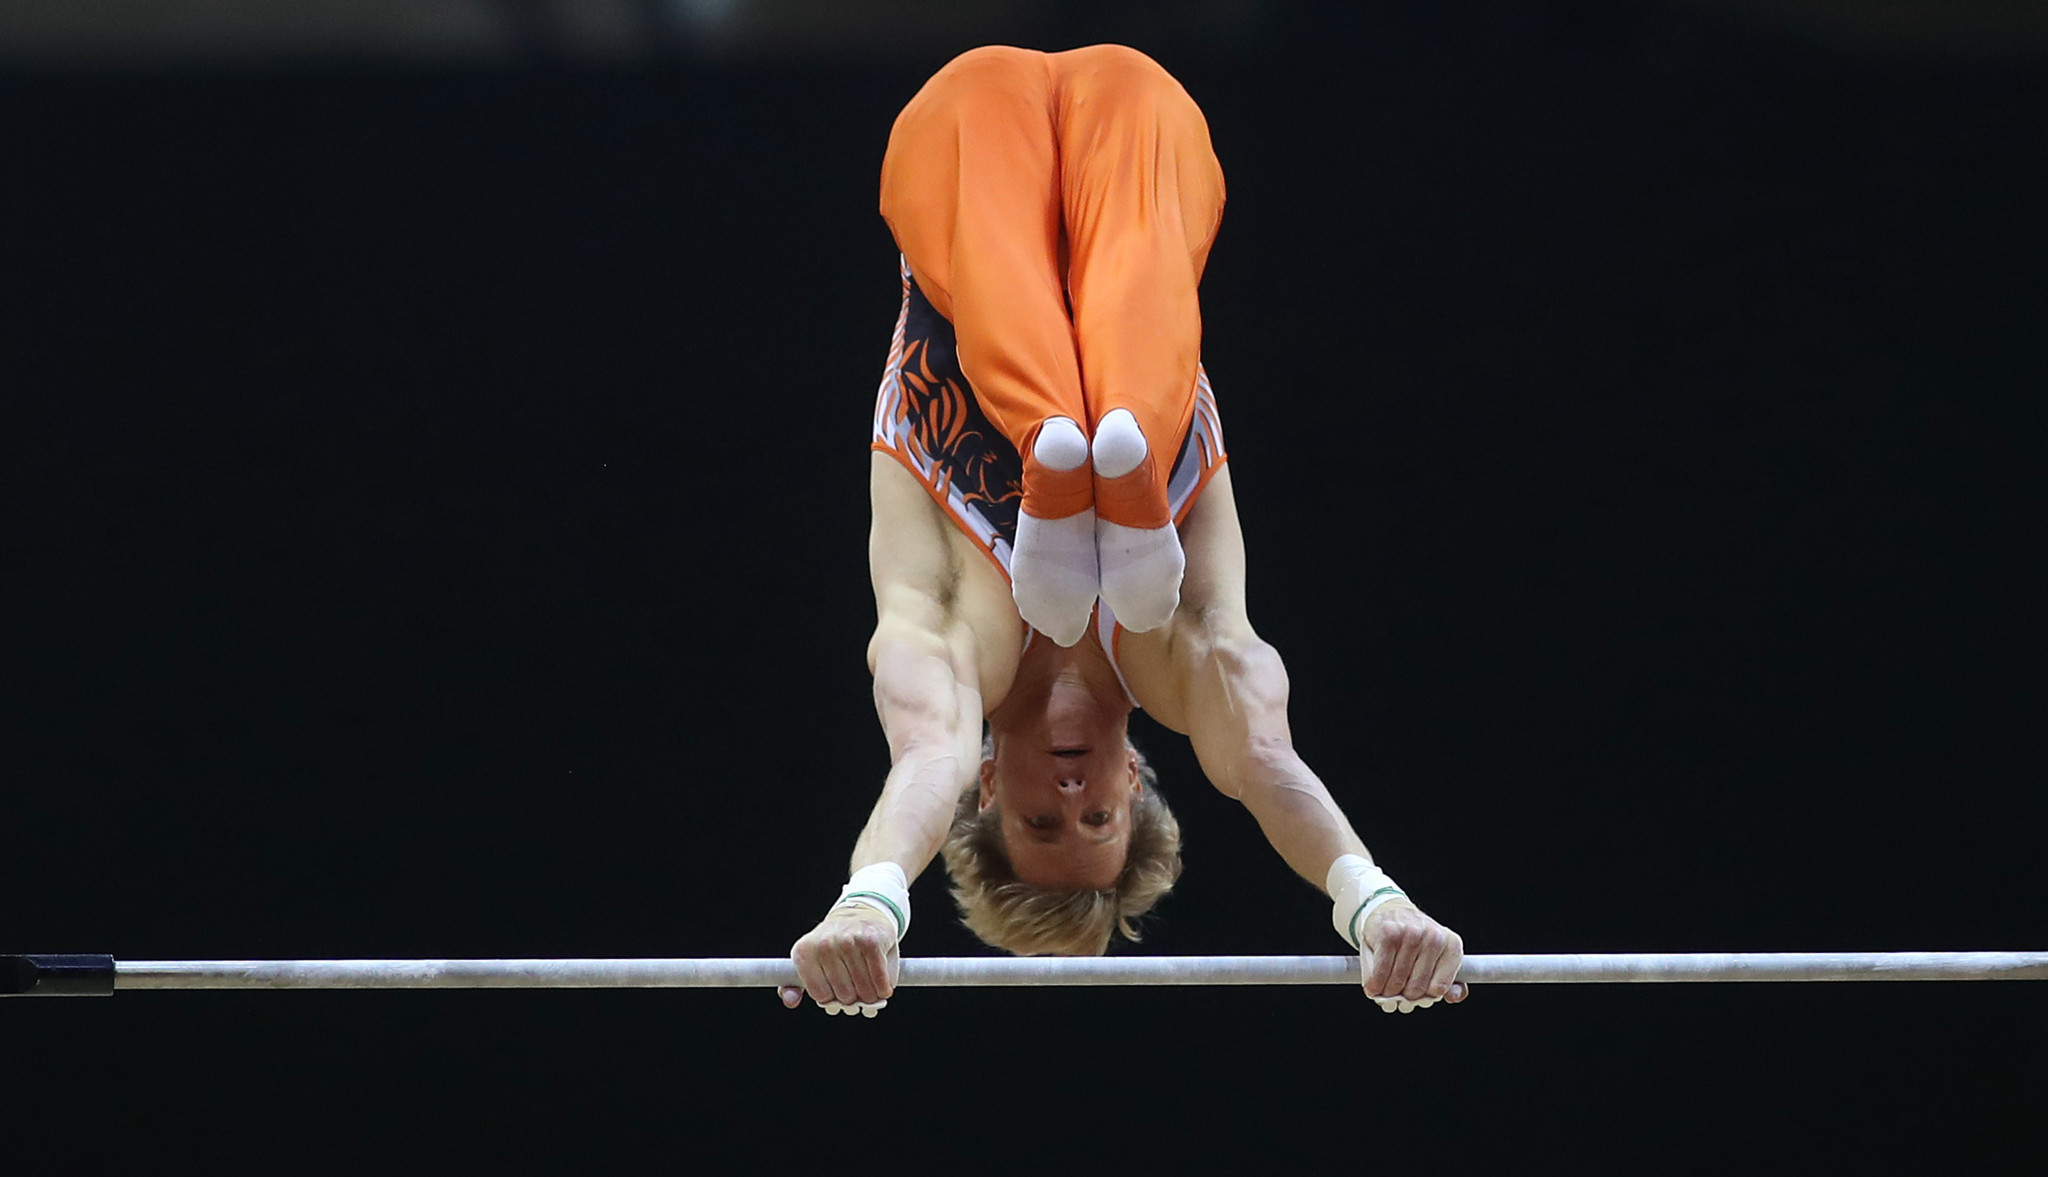 London 2012 Olympic high bar champion Epke Zonderland is among the entrants in Melbourne ©Getty Images